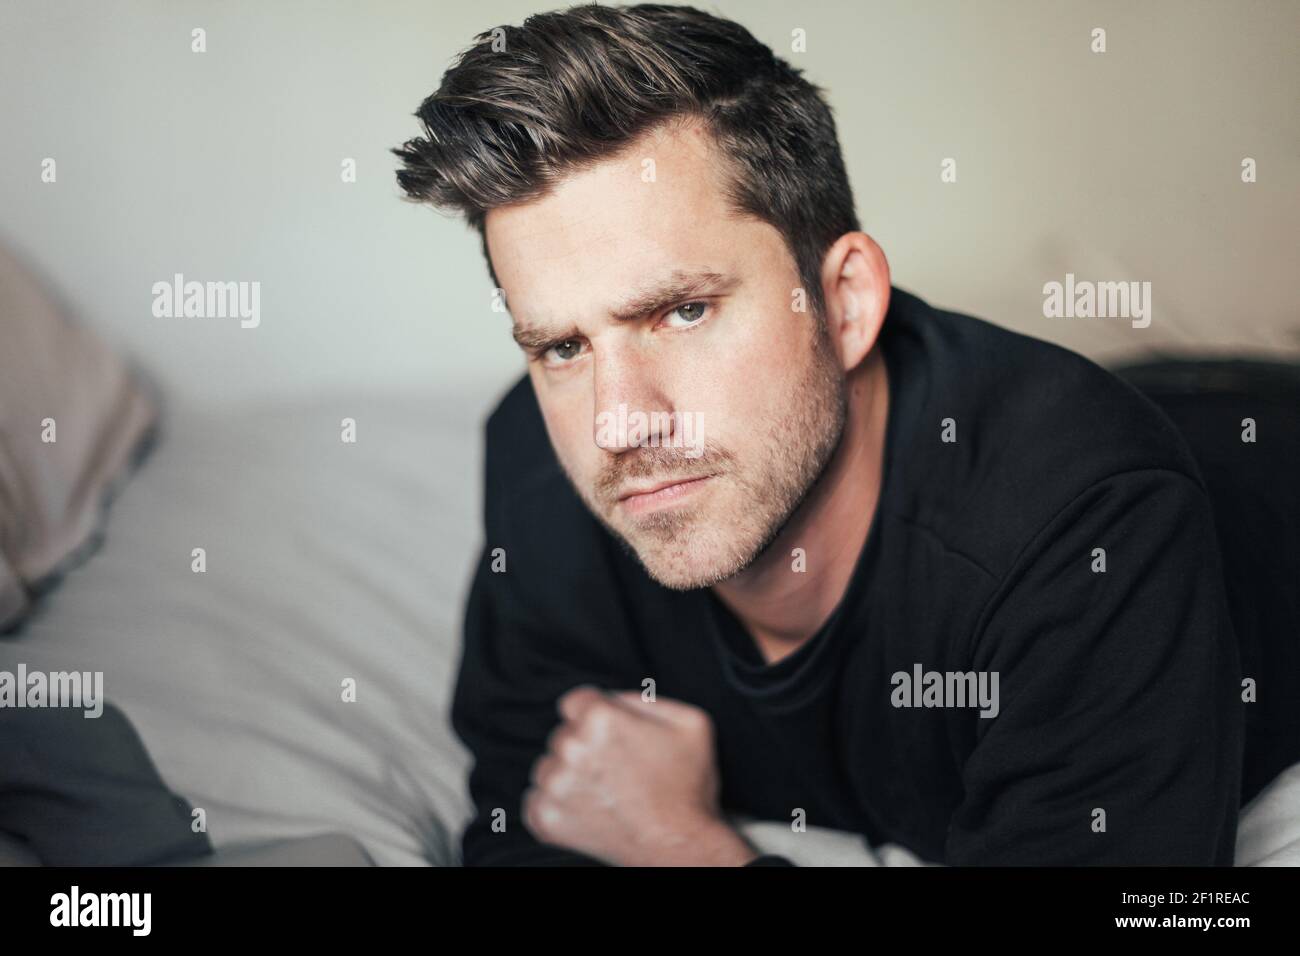 Handsome man looks serious and angry looking at the camera Stock Photo